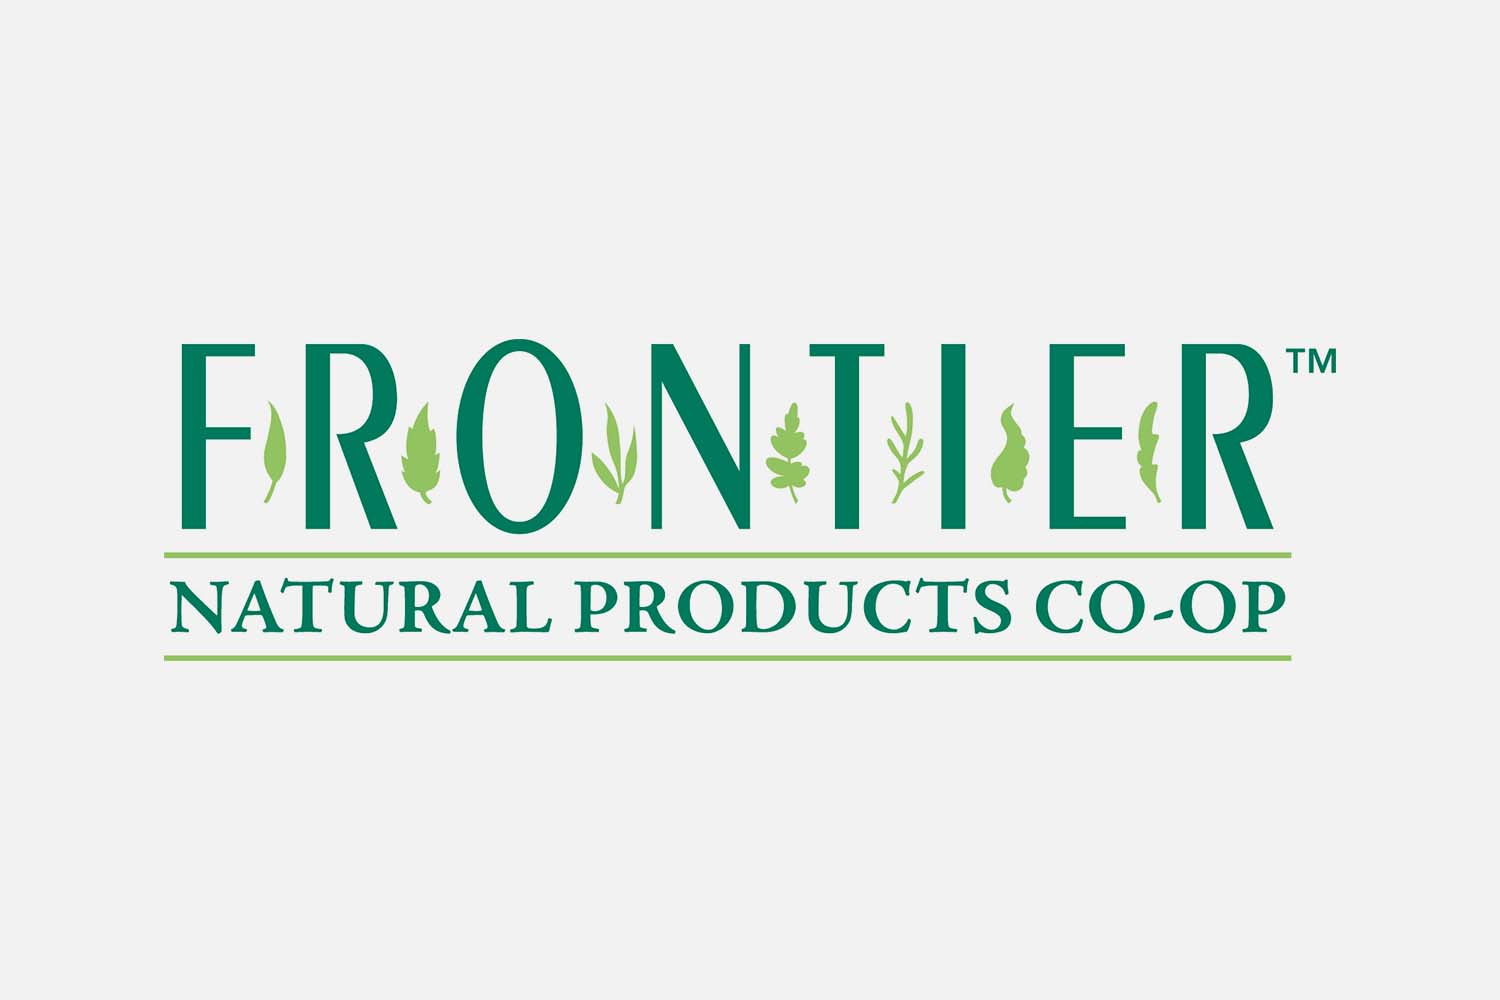 REFERENZEN_LOGO_Frontier_Natural_Products